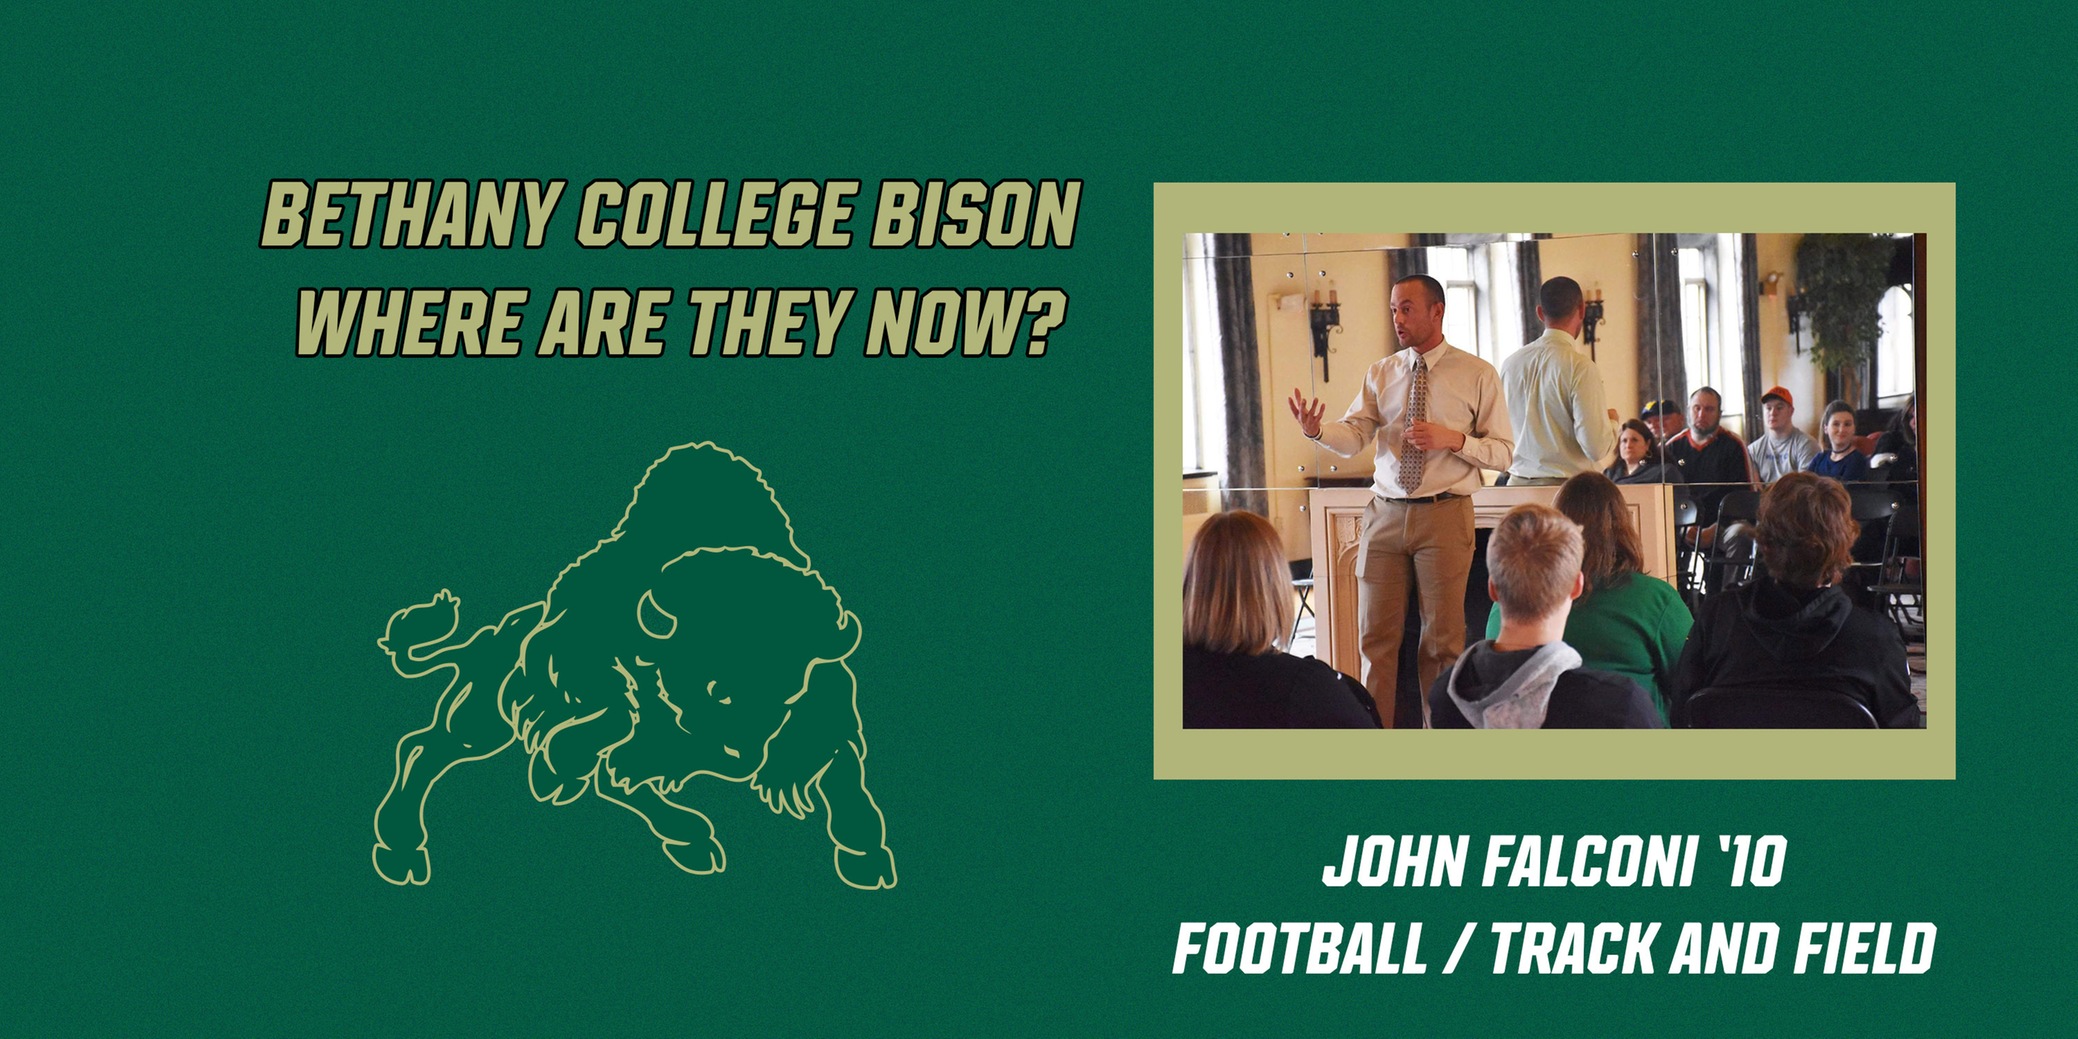 Where Are They Now Series -John Falconi '10, Football / Track and Field